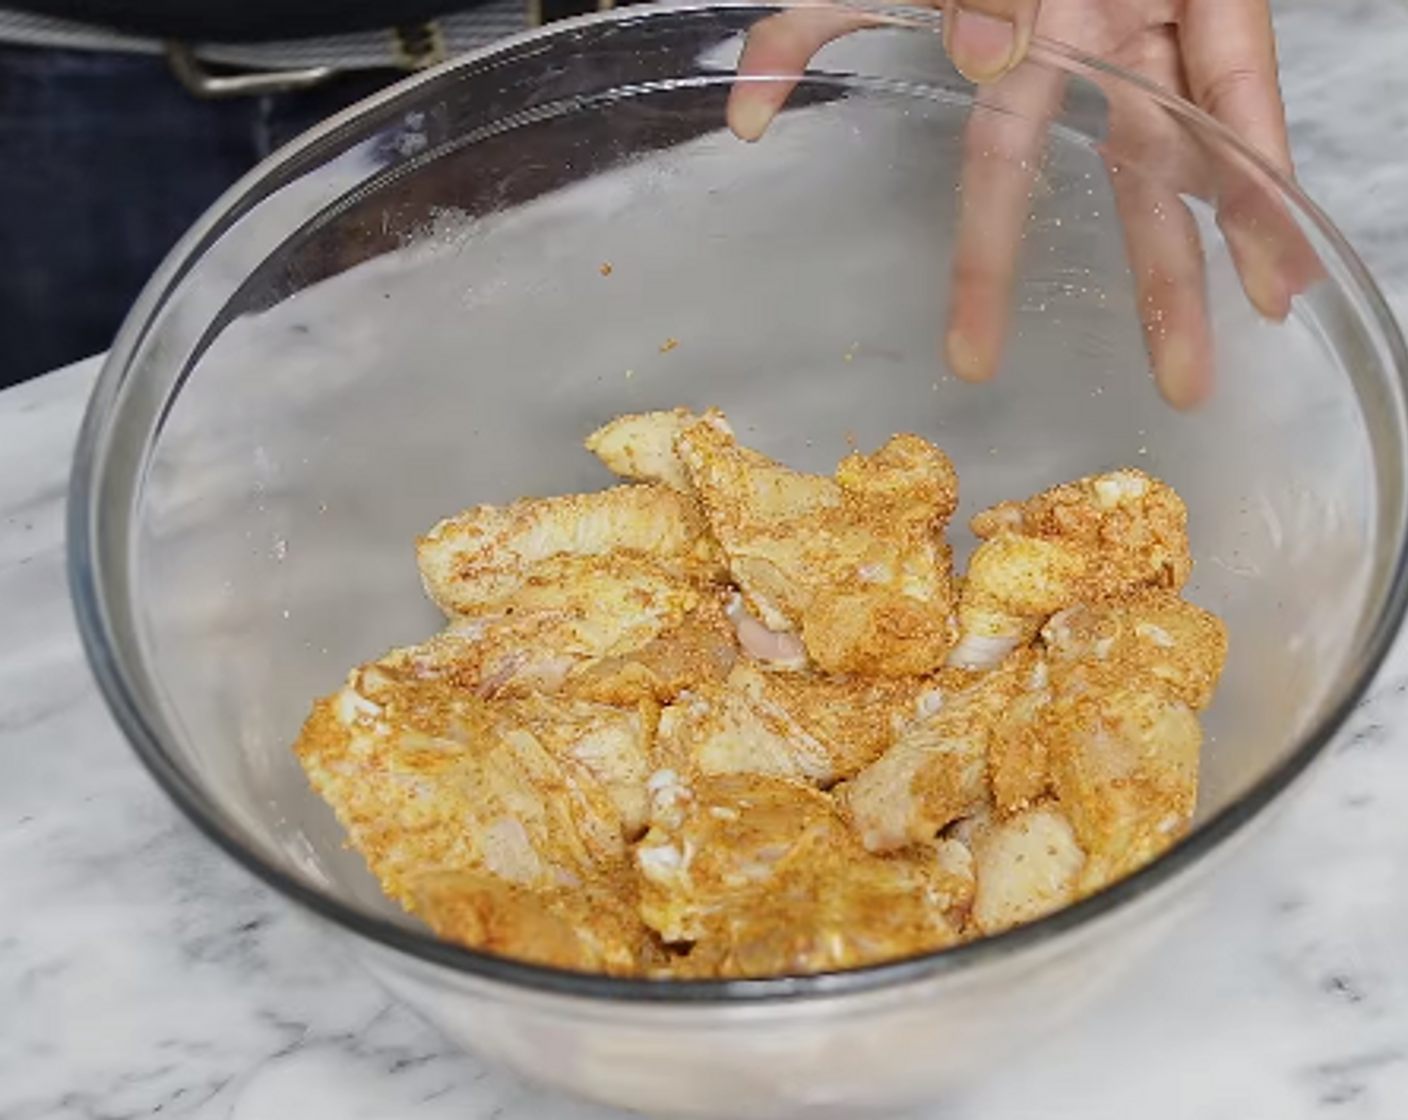 step 2 In a large bowl, toss the Chicken Drumette (1 lb) and Chicken Wing (1 lb) with Baking Powder (1 Tbsp), Paprika (1 tsp), McCormick® Garlic Powder (1/2 Tbsp), Onion Powder (1/2 Tbsp) , Black Ground Black Pepper (to taste) and Salt (1 tsp).